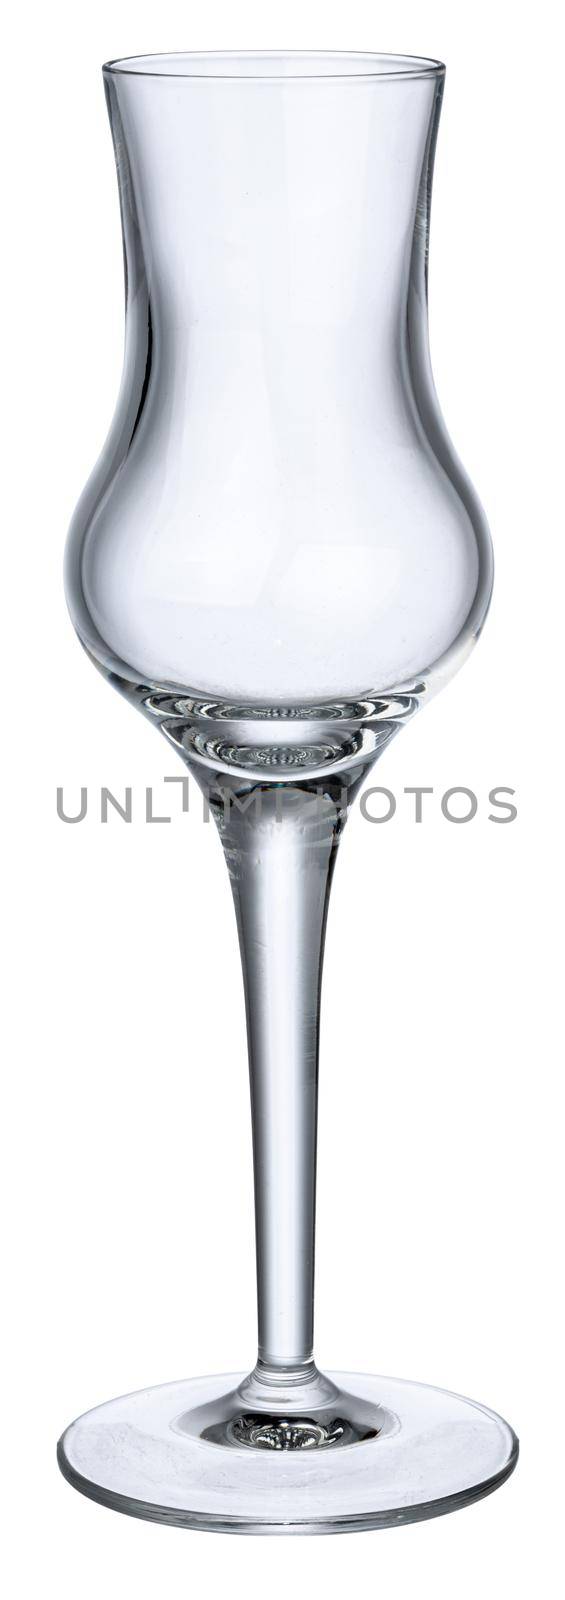 Empty champagne glass isolated on white background close up